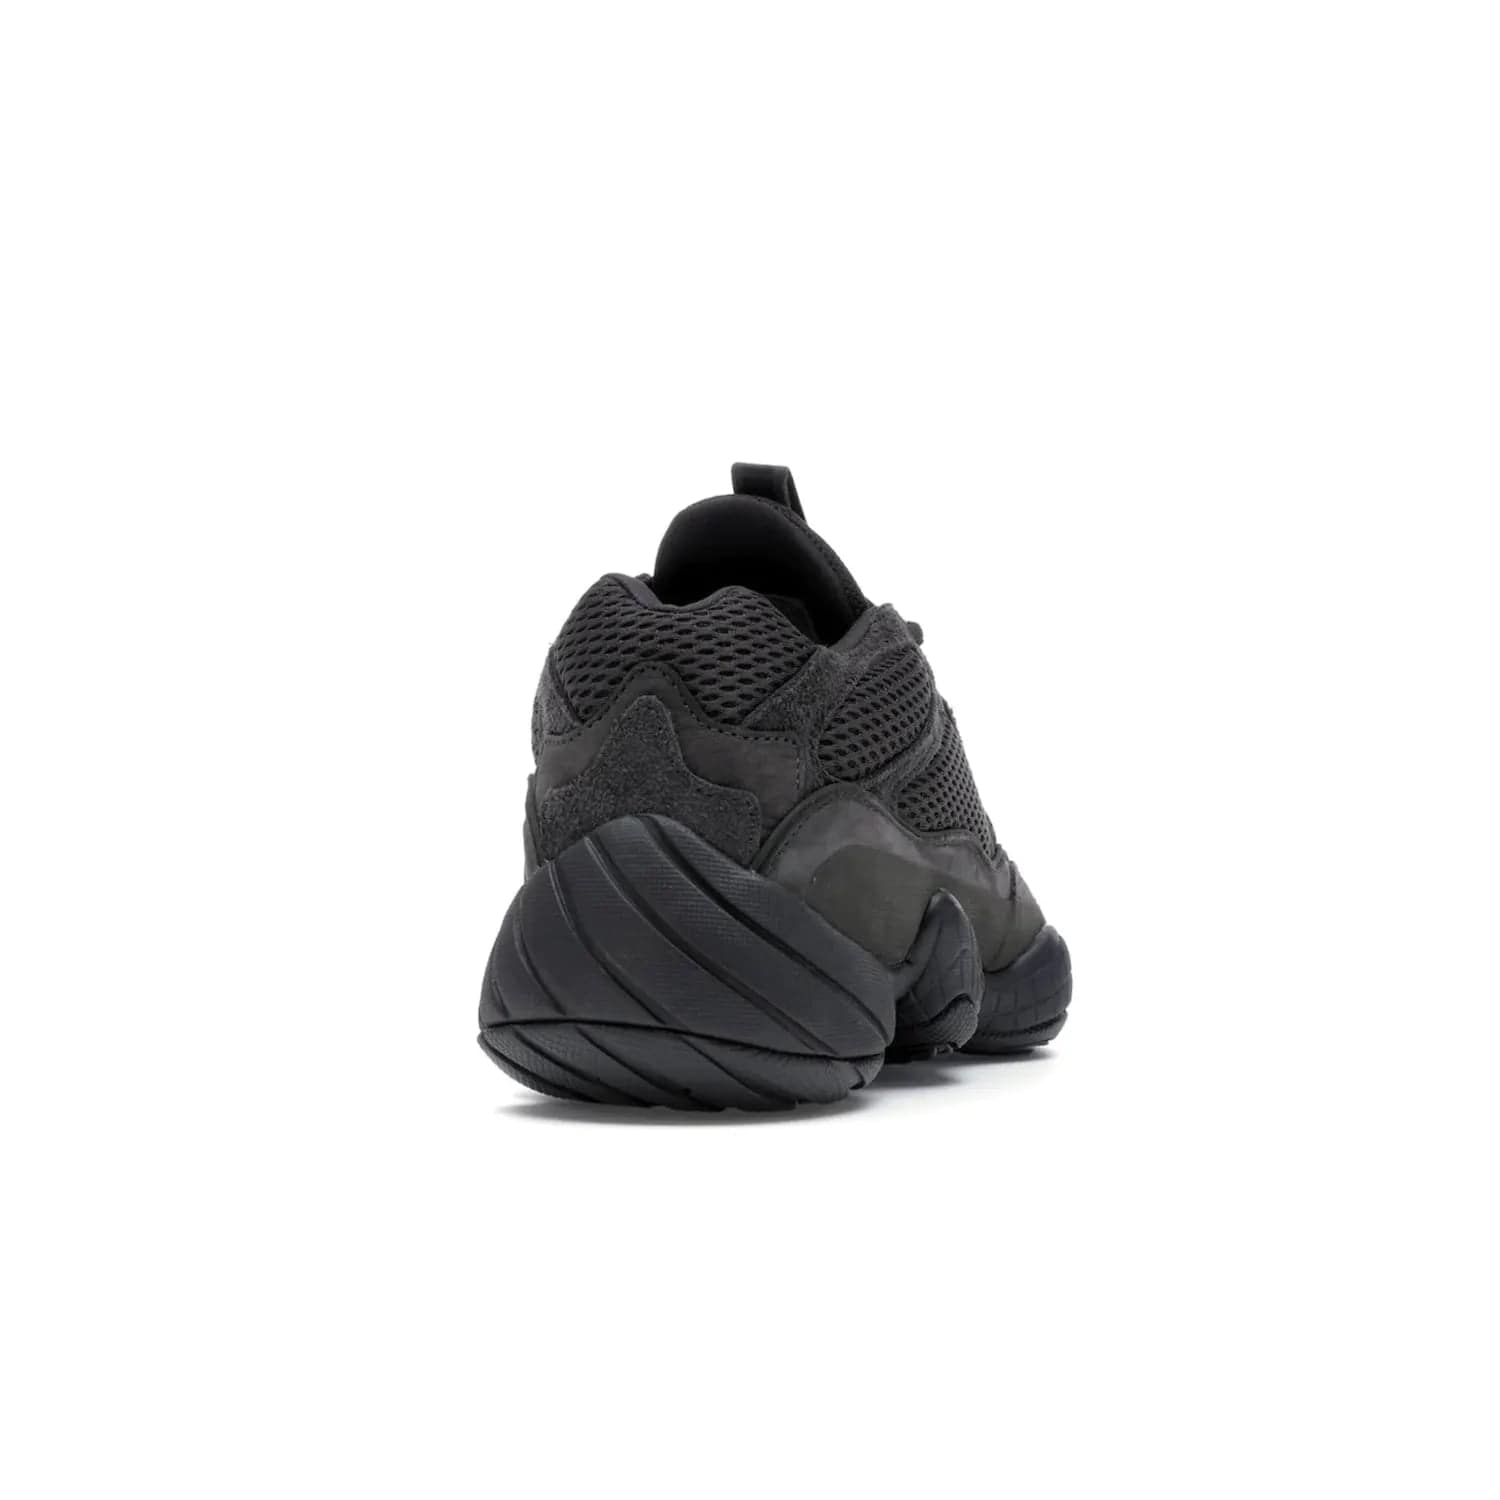 adidas Yeezy 500 Utility Black - Image 30 - Only at www.BallersClubKickz.com - Iconic adidas Yeezy 500 Utility Black in All-Black colorway. Durable black mesh and suede upper with adiPRENE® sole delivers comfort and support. Be unstoppable with the Yeezy 500 Utility Black. Released July 2018.